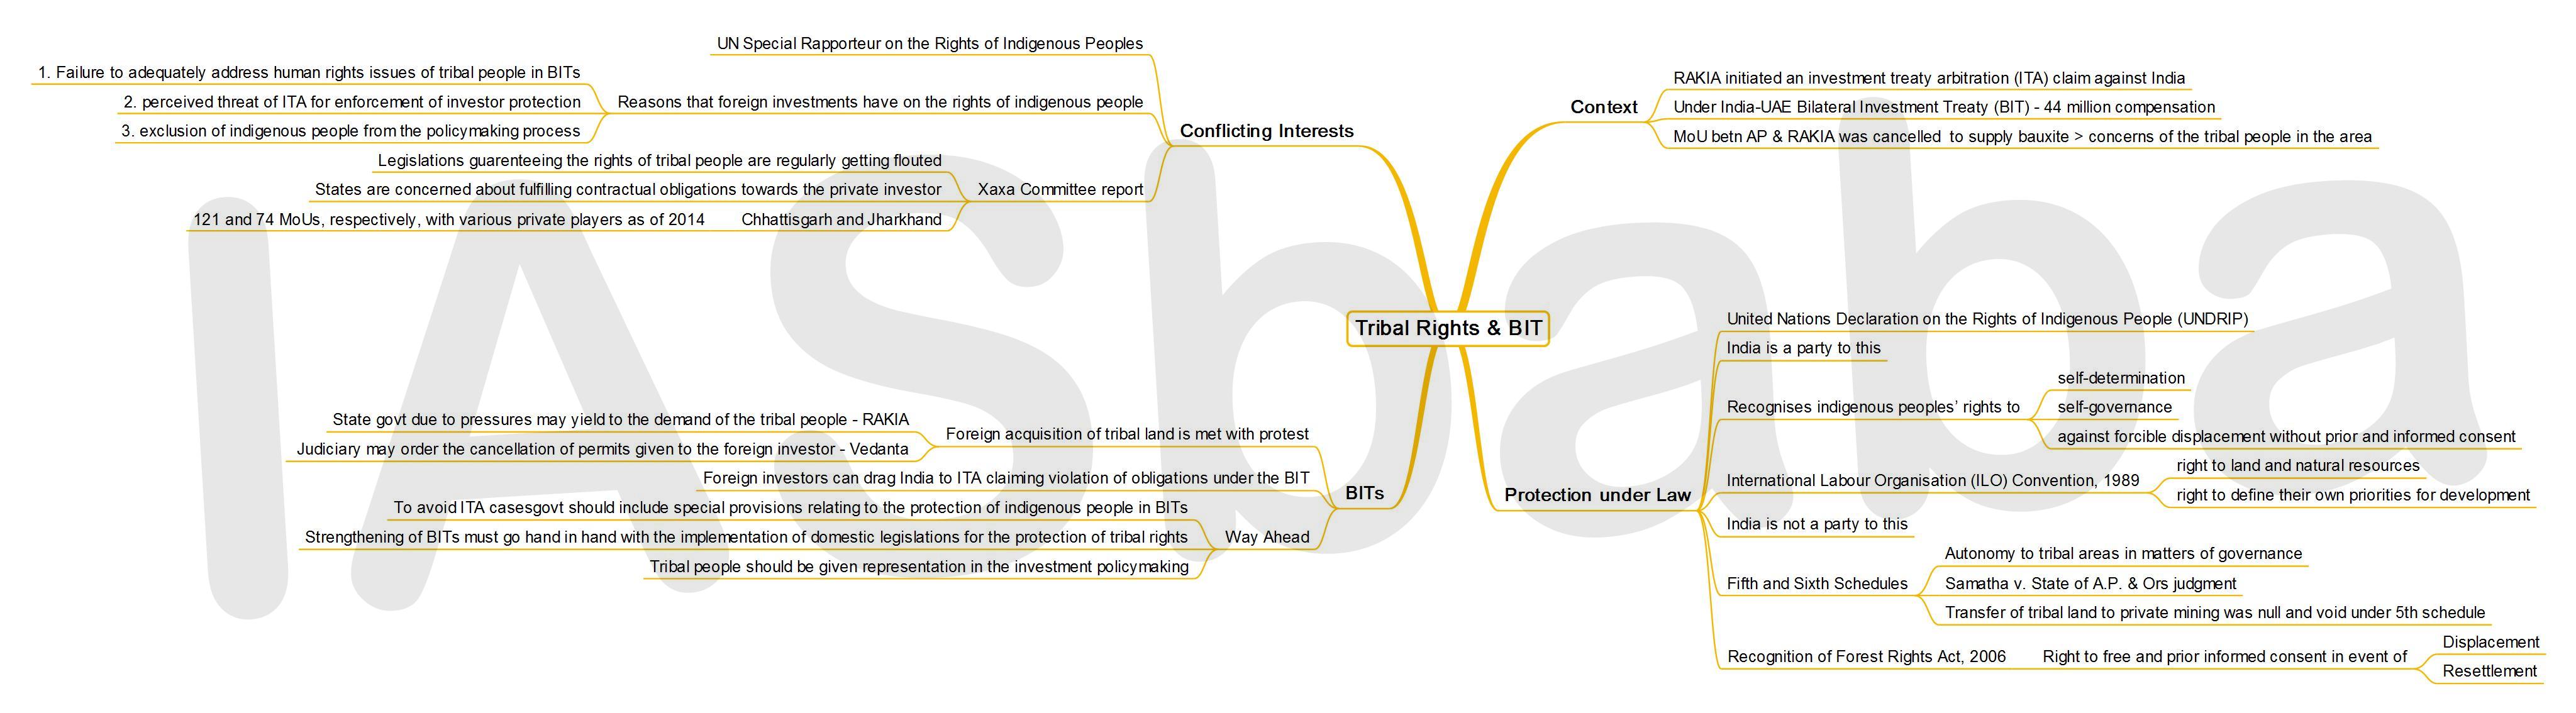 Mindmap: Scheduled and Tribal Areas - Indian Polity for UPSC CSE